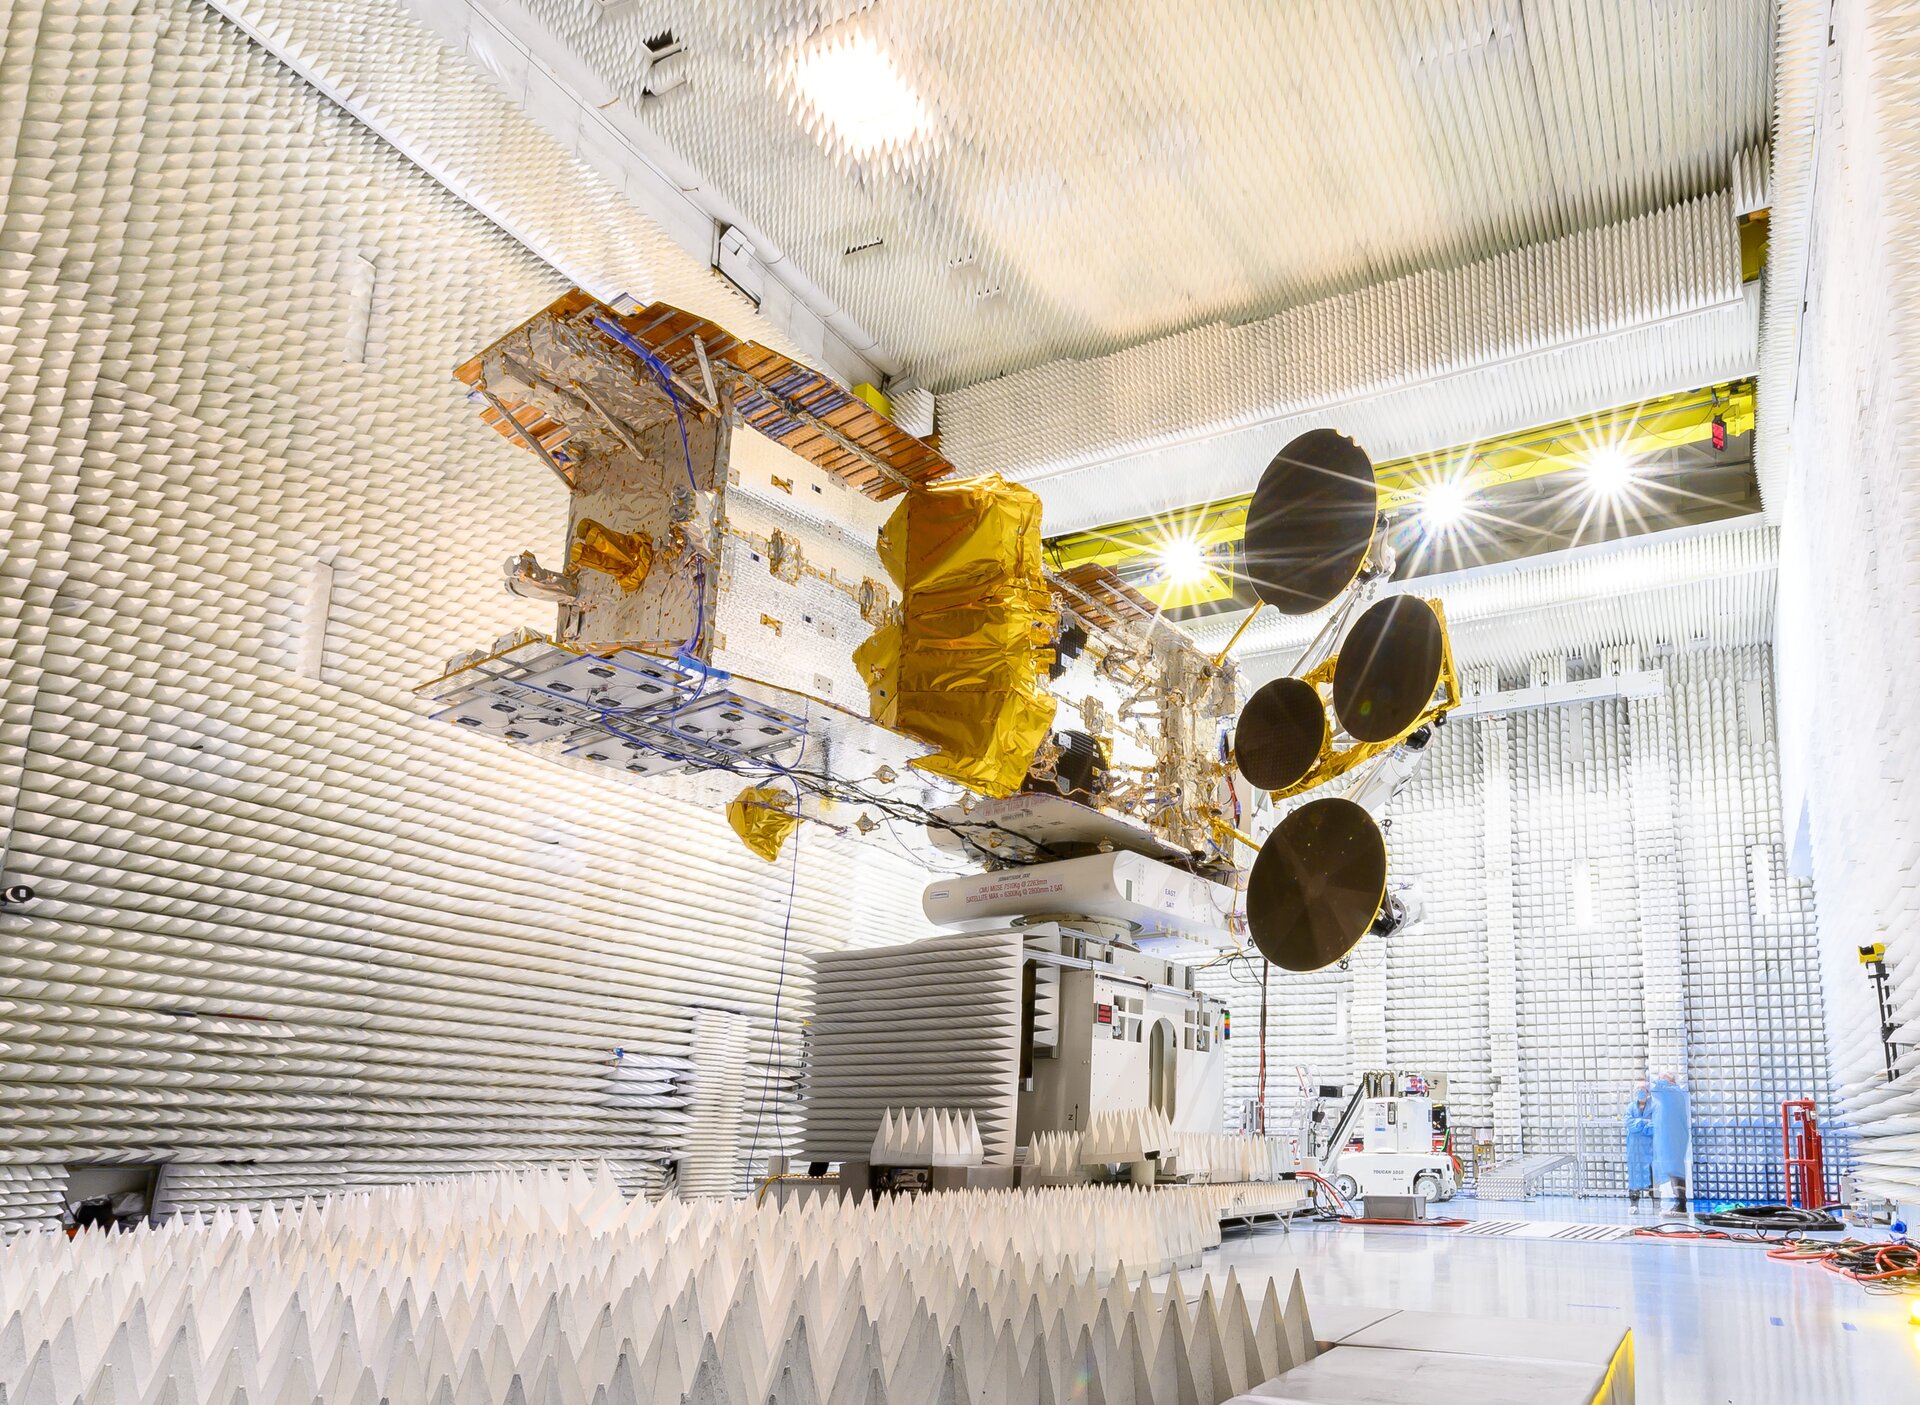 SES-17 in the compact antenna test range